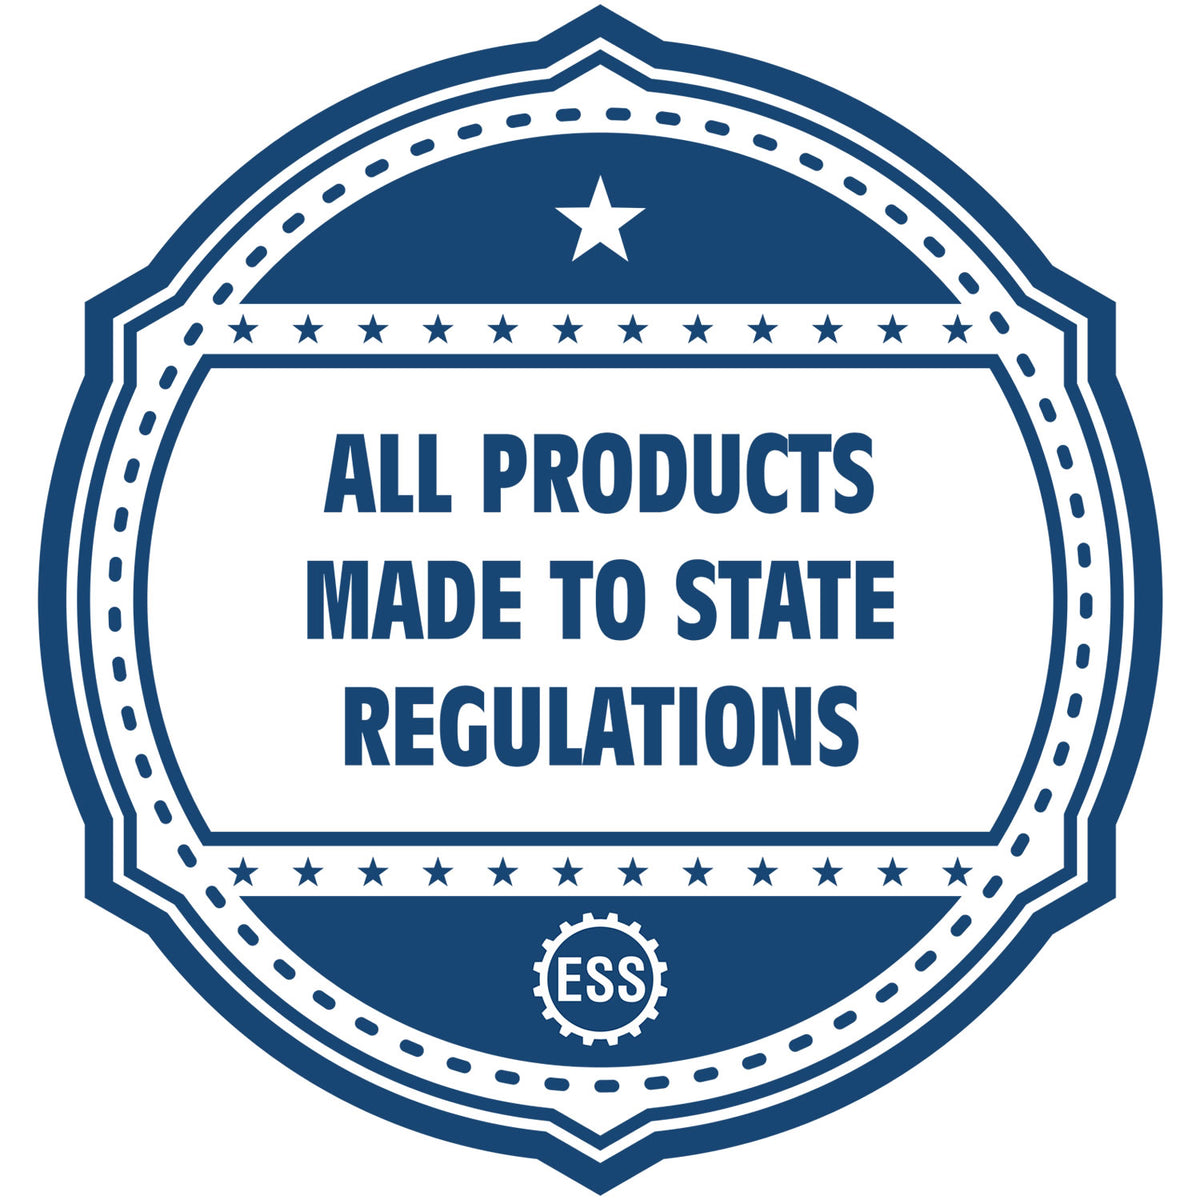 A blue icon or badge for the Gift West Virginia Engineer Seal showing that this product is made in compliance with state regulations.